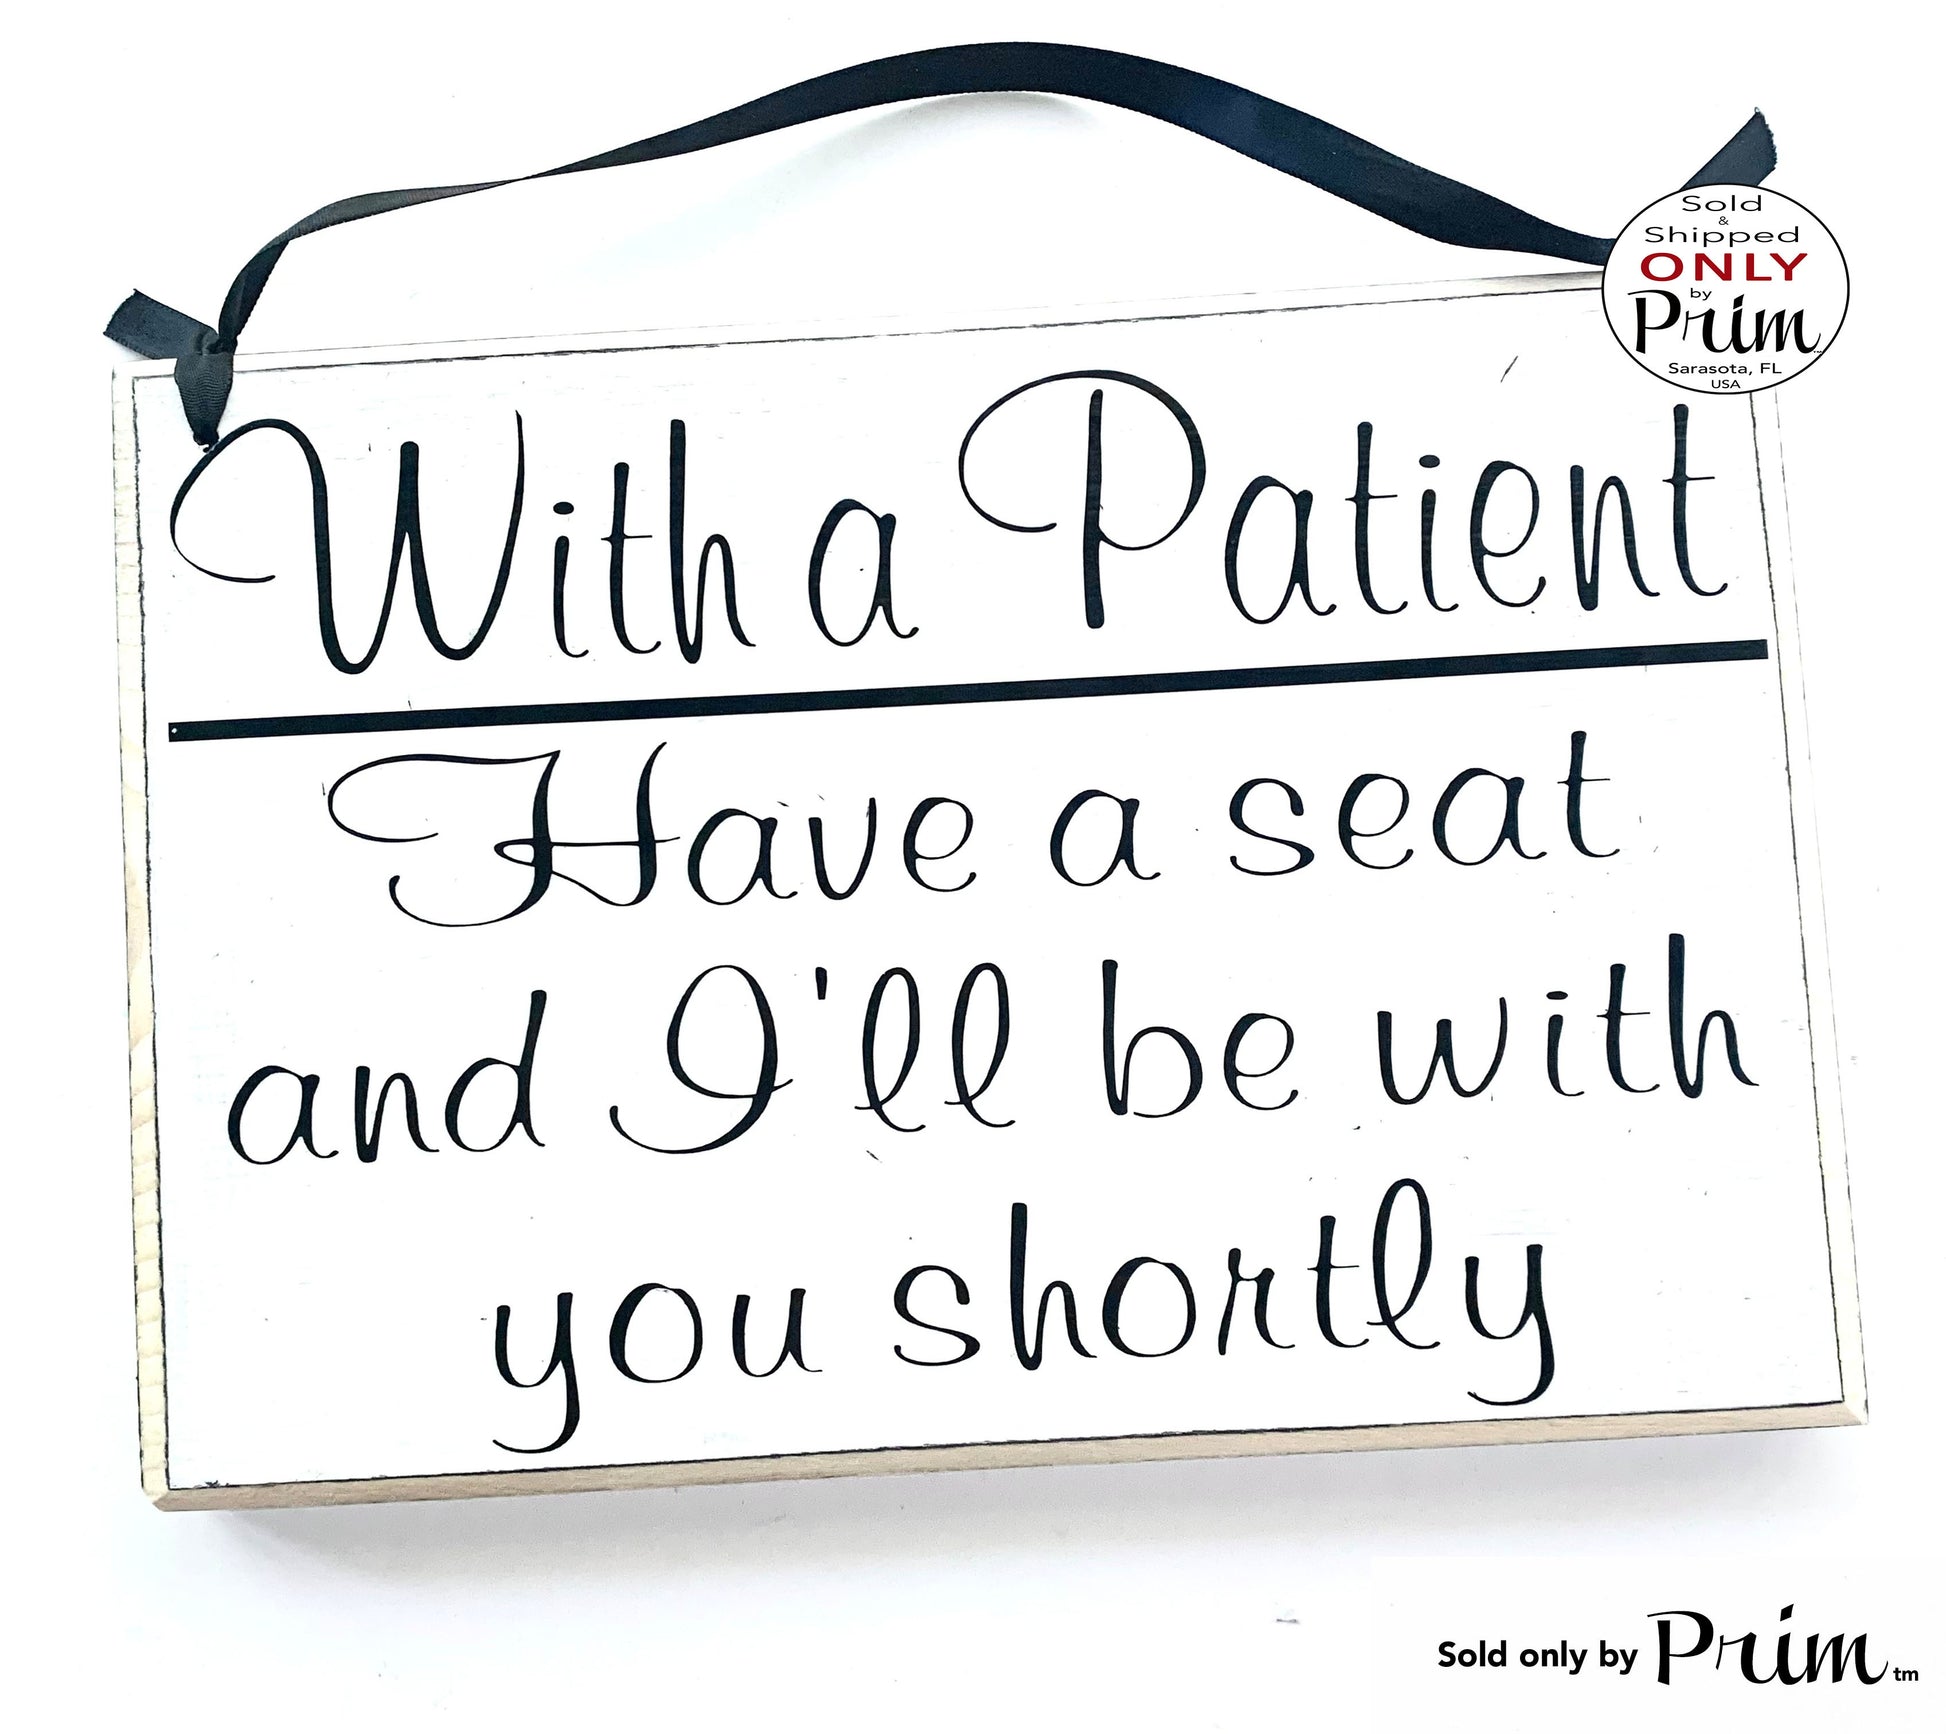 10x8 With a Patient Have a Seat and I'll Be With You Shortly Custom Wood Sign Salon Spa Office Please Have a Seat In Session Meeting Plaque Designs by Prim